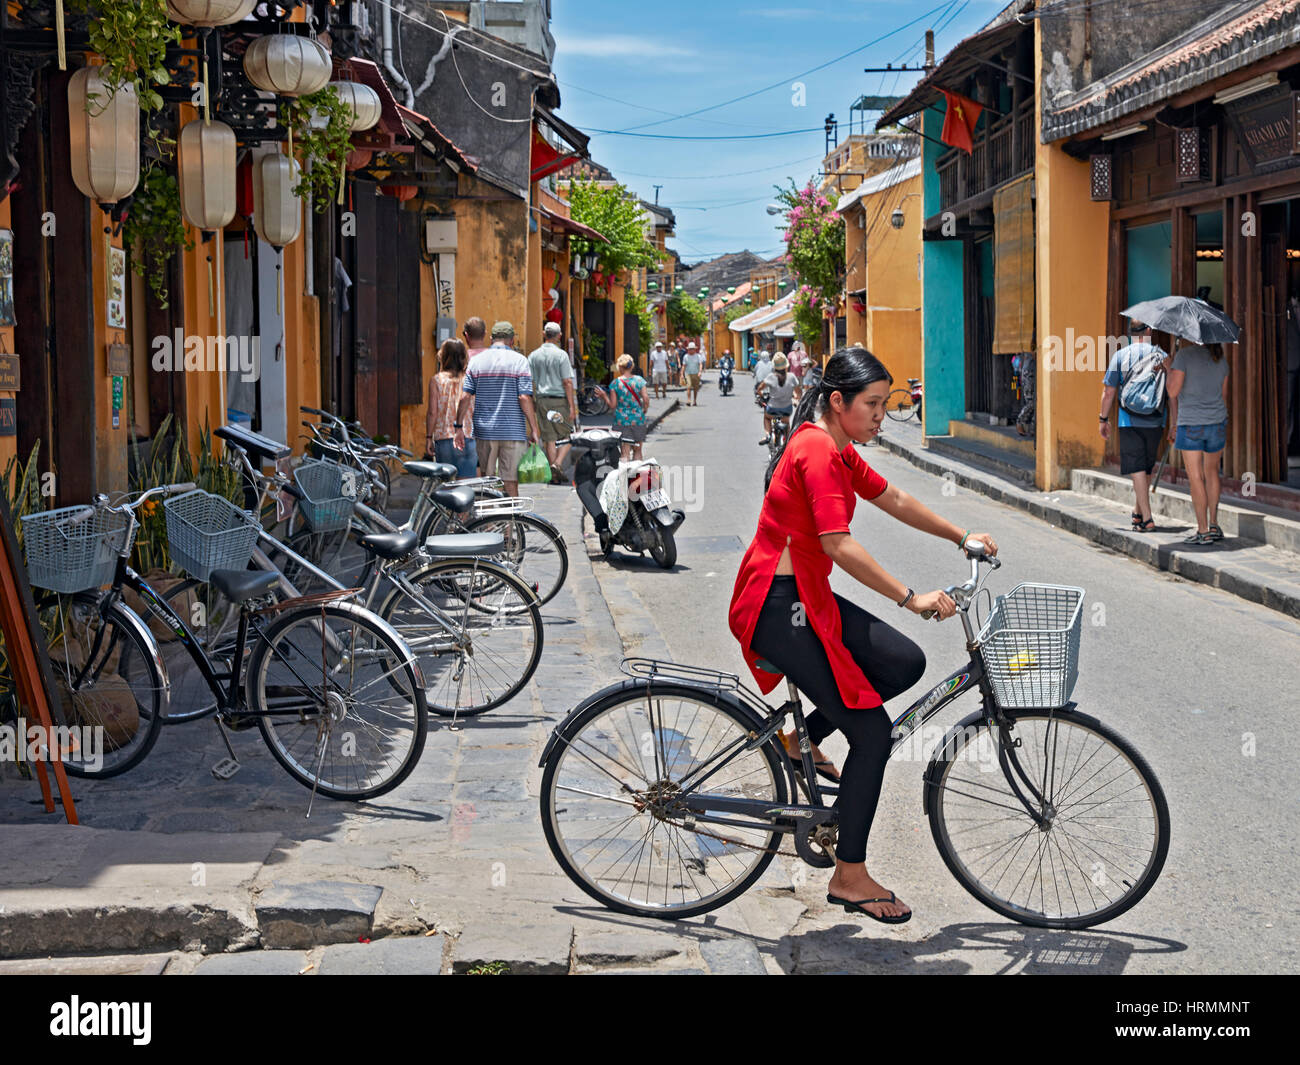 Young Vietnamese woman in red ao dai dress riding bicycle. Hoi An Ancient Town, Quang Nam Province, Vietnam. Stock Photo